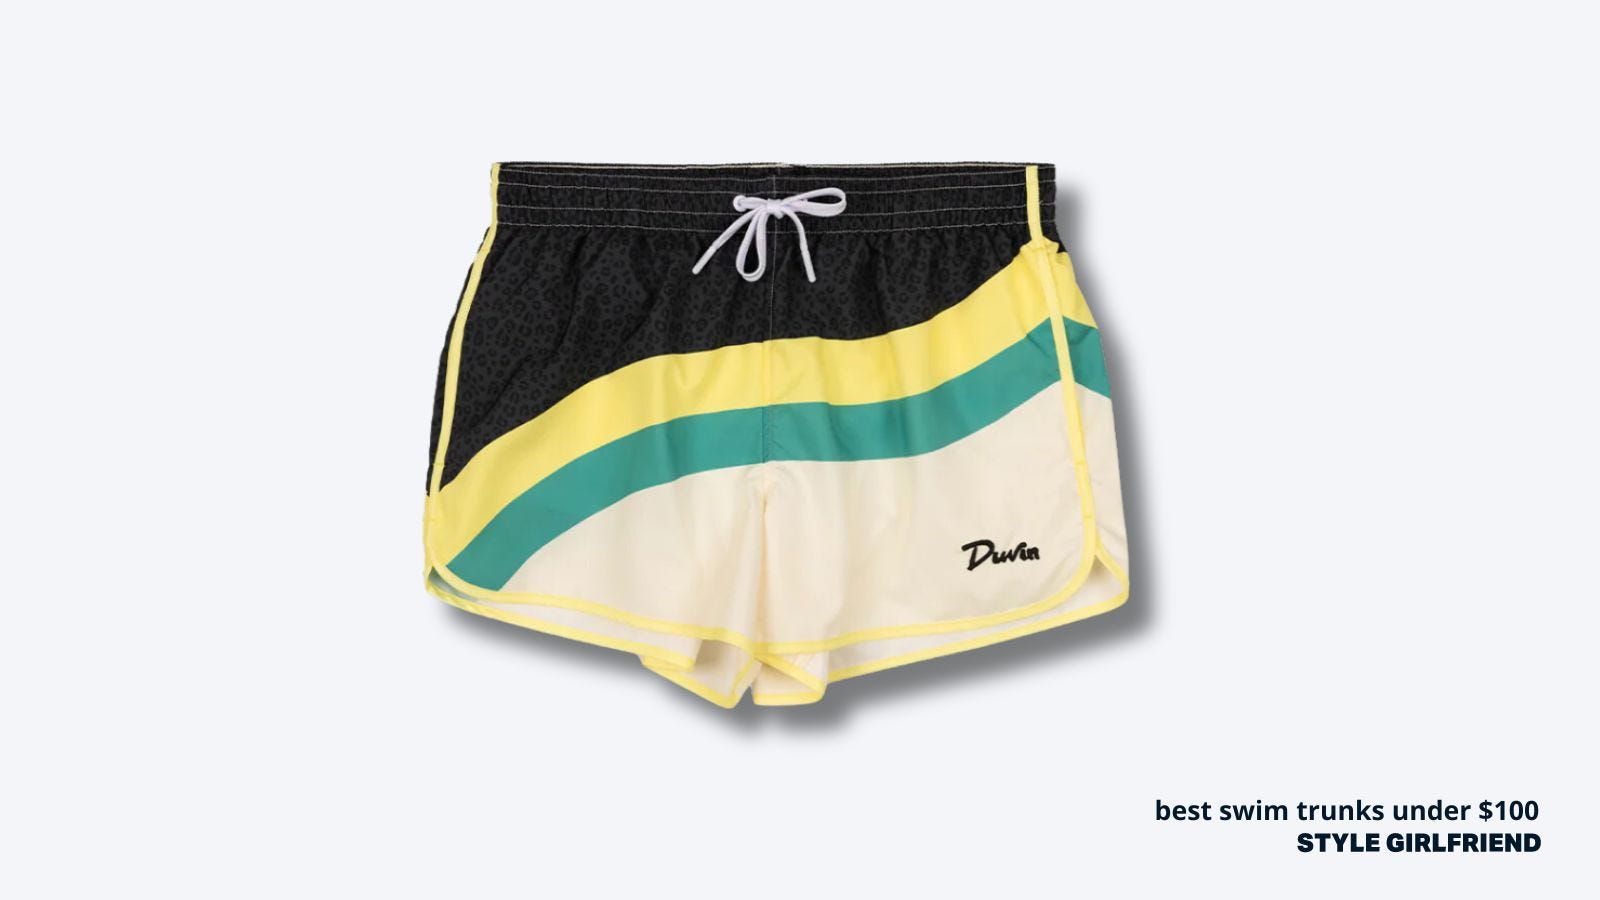 flat lay image of men's swim trunks in a wavy black, yellow and mint green pattern. text on-screen reads: best swim trunks under $100